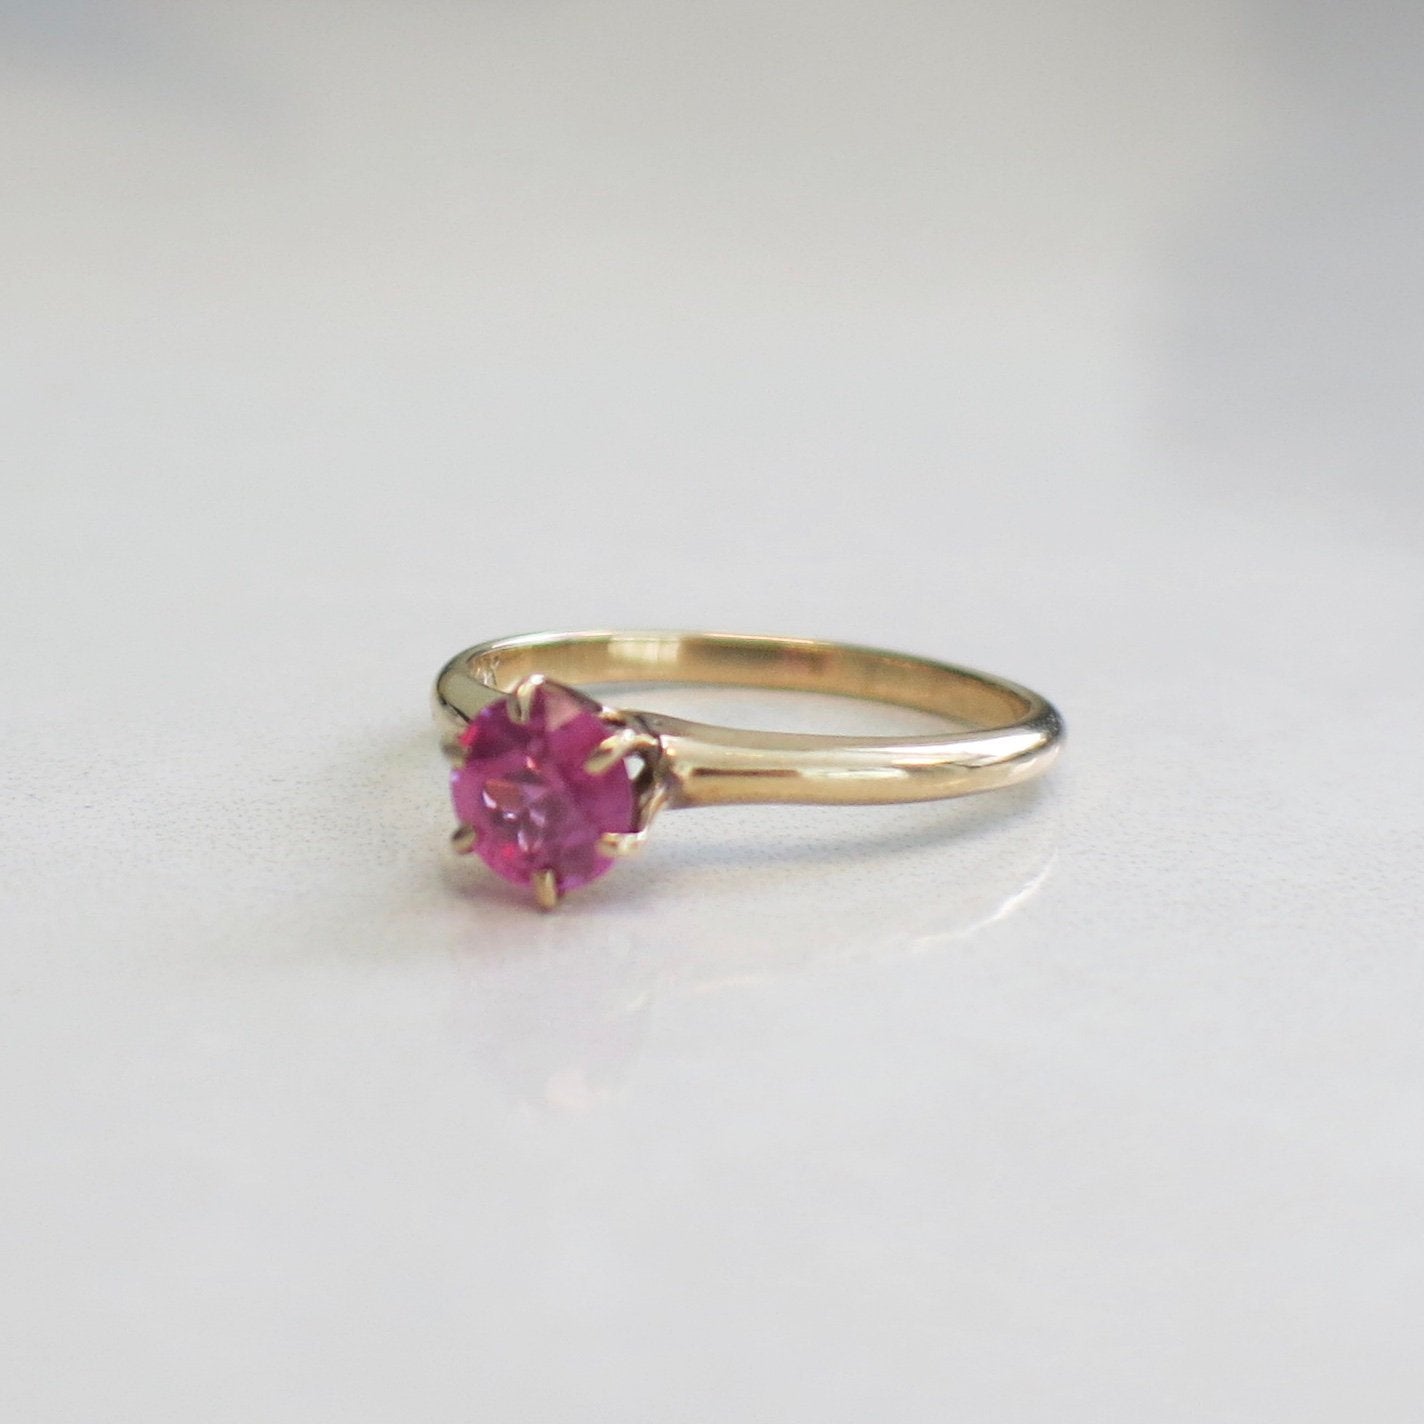 Vs Natural Pink Sapphire Solitaire Ring Solid 14K Rose Gold Engagement statement. Pink Diamond Alternative. Pink Stone Jewelry. Anniversary